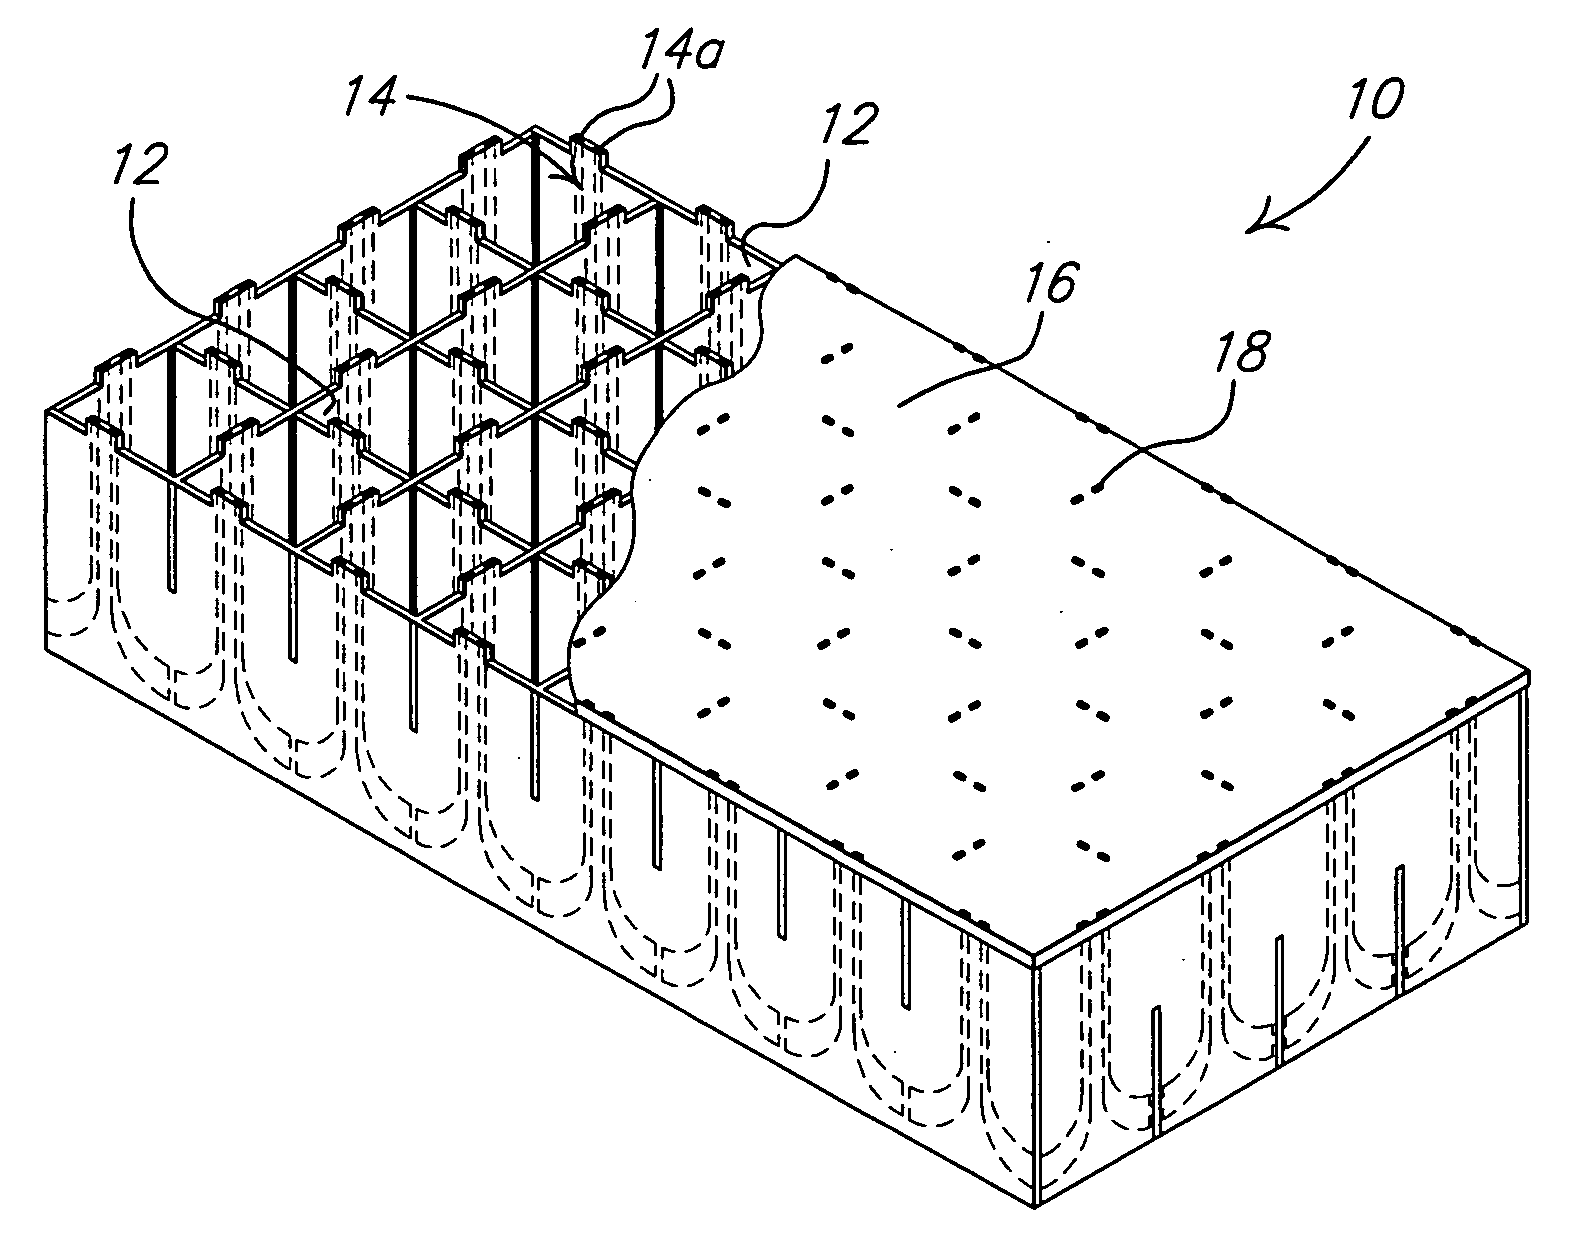 Design and fabrication methodology for a phased array antenna with shielded/integrated structure